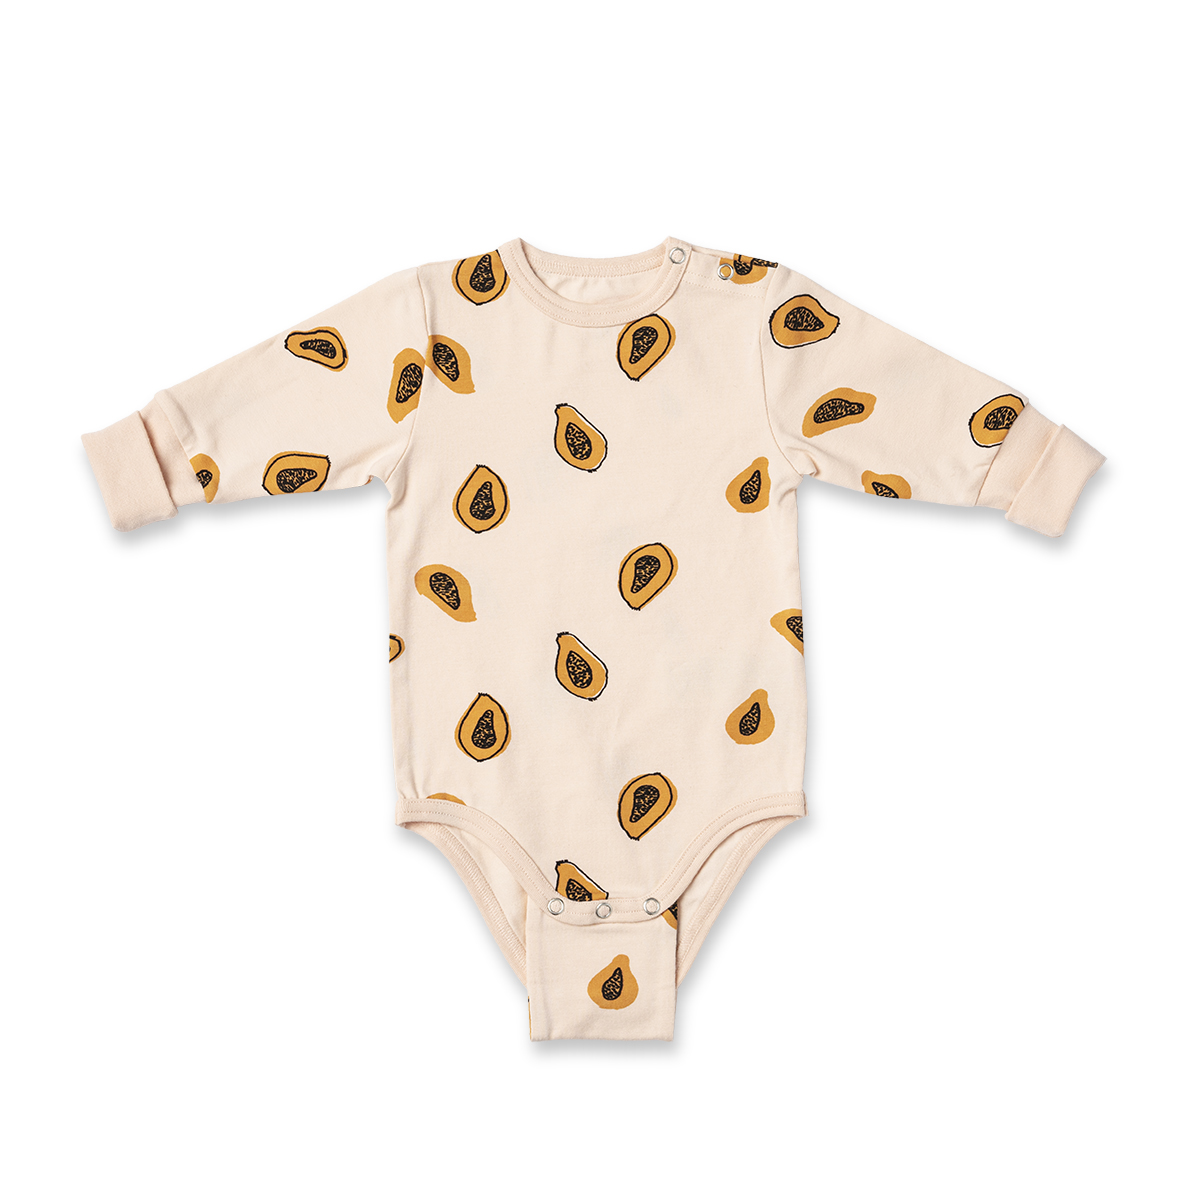 Long-sleeved bodysuit with papaya pattern and extender between the legs.